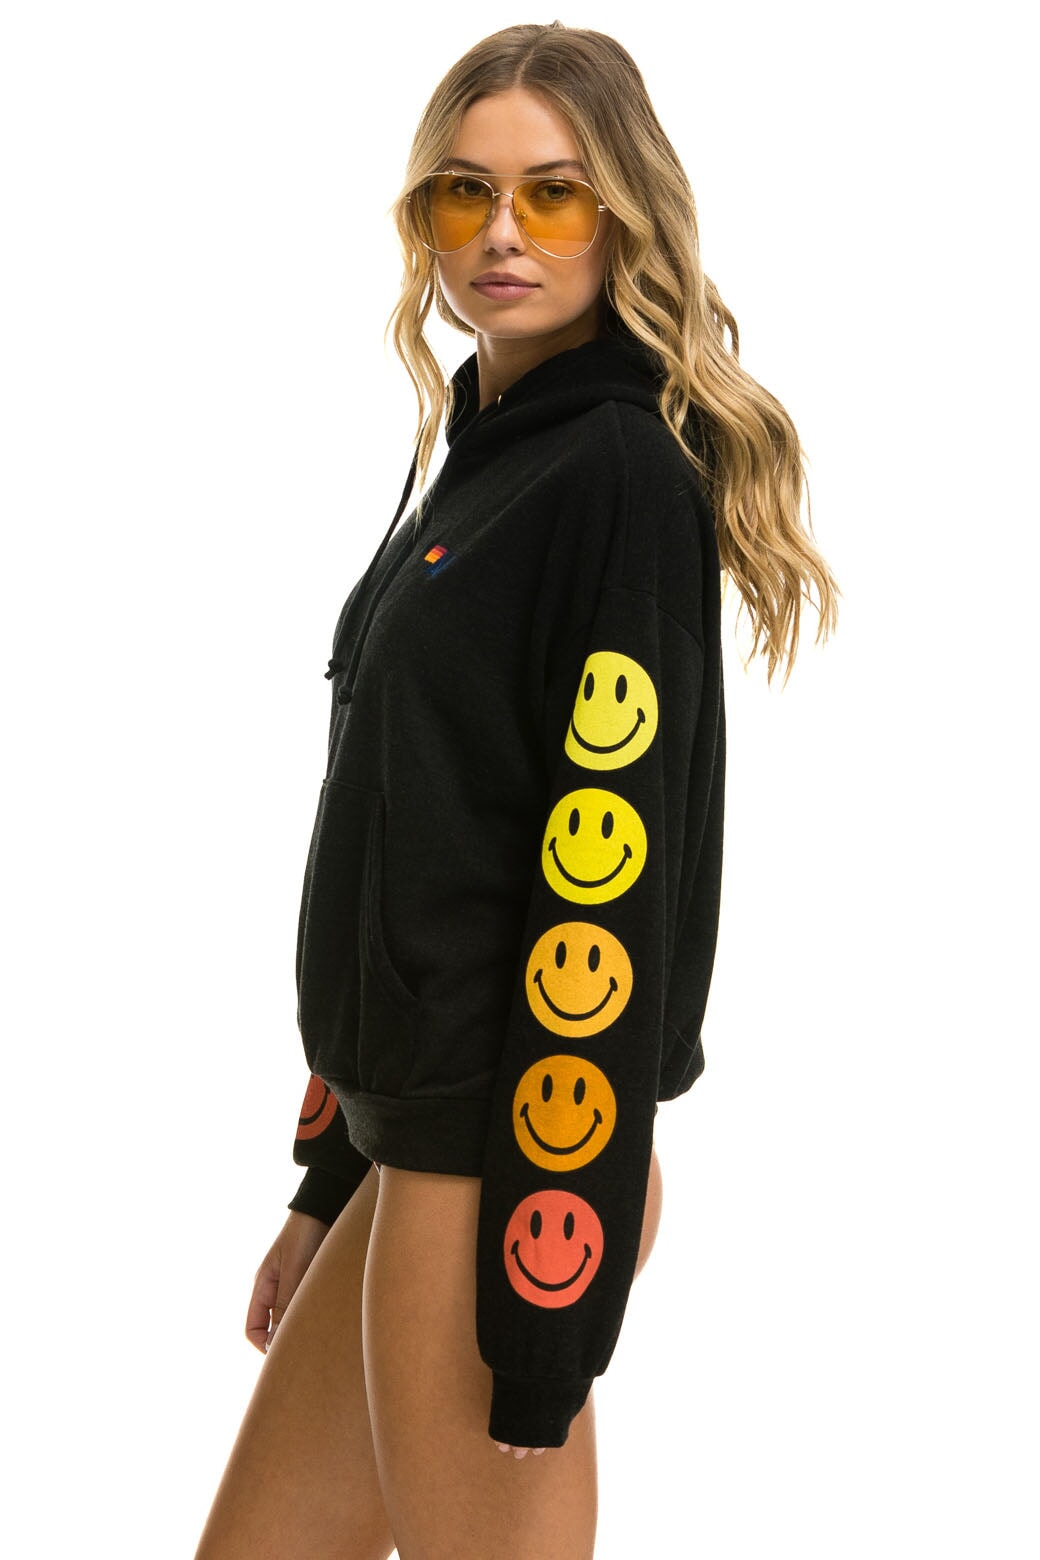 SMILEY SUNSET RELAXED PULLOVER HOODIE - BLACK Hoodie Aviator Nation 